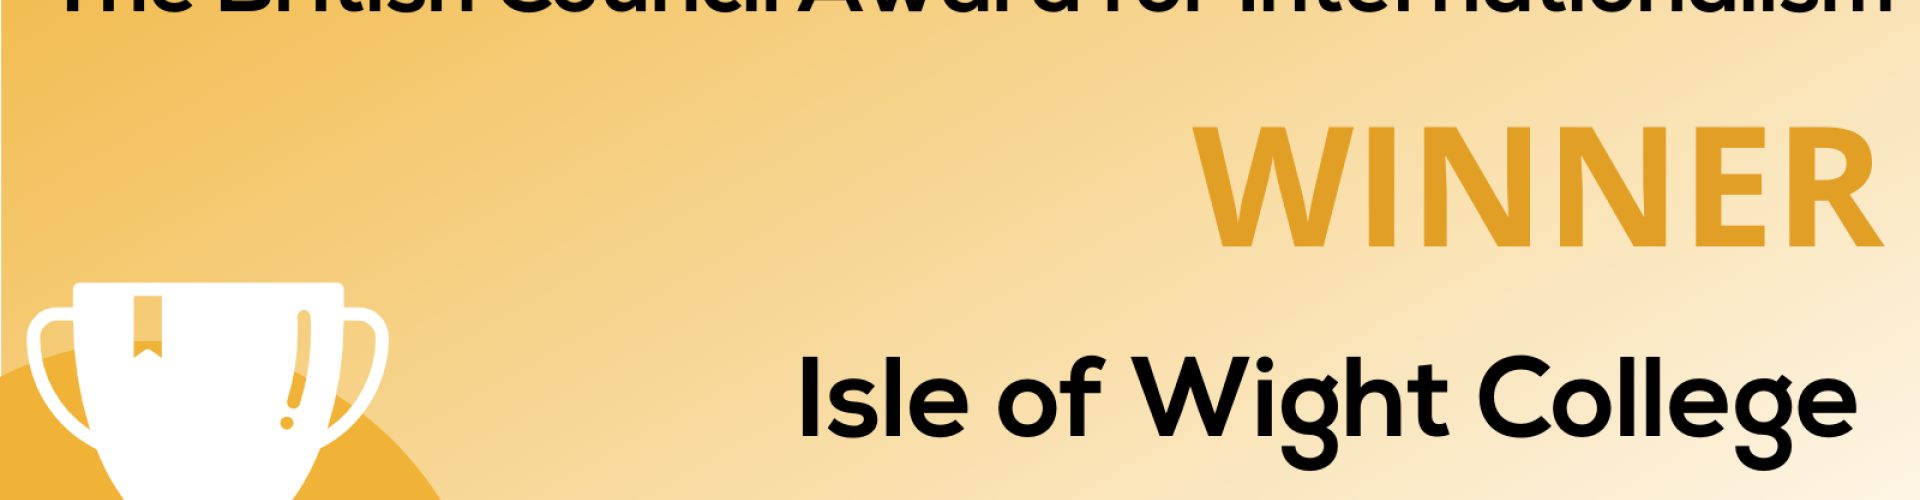 The British Council Award for Internationalism Isle of Wight College